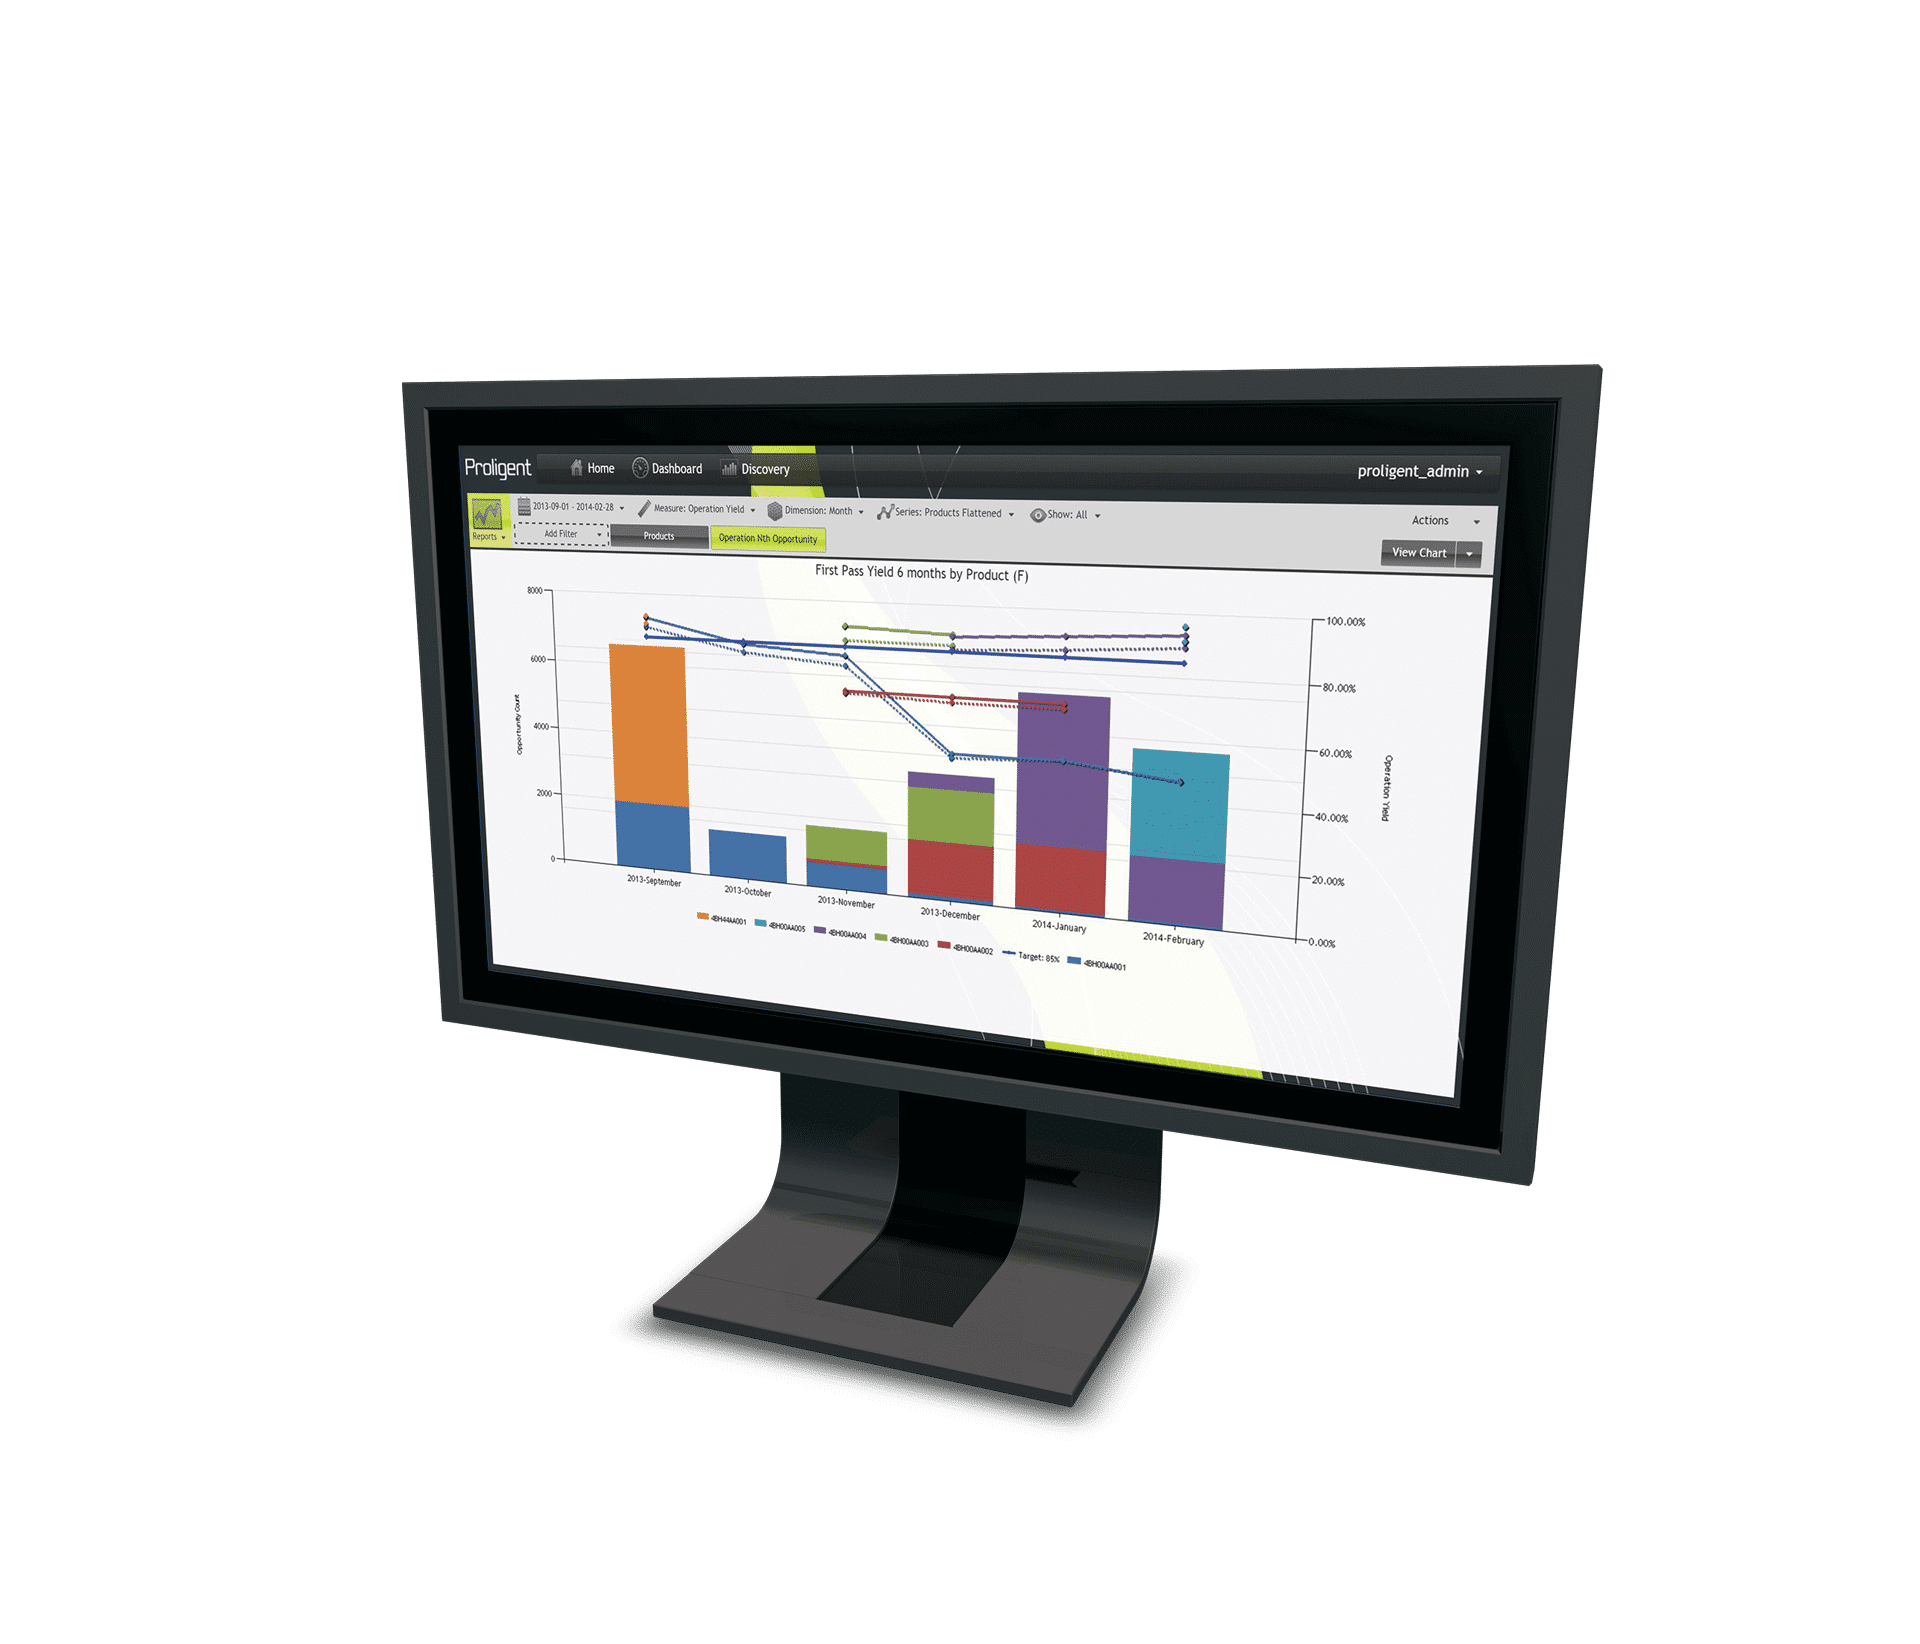 Monitor with Proligent Screen Product Evolution by version